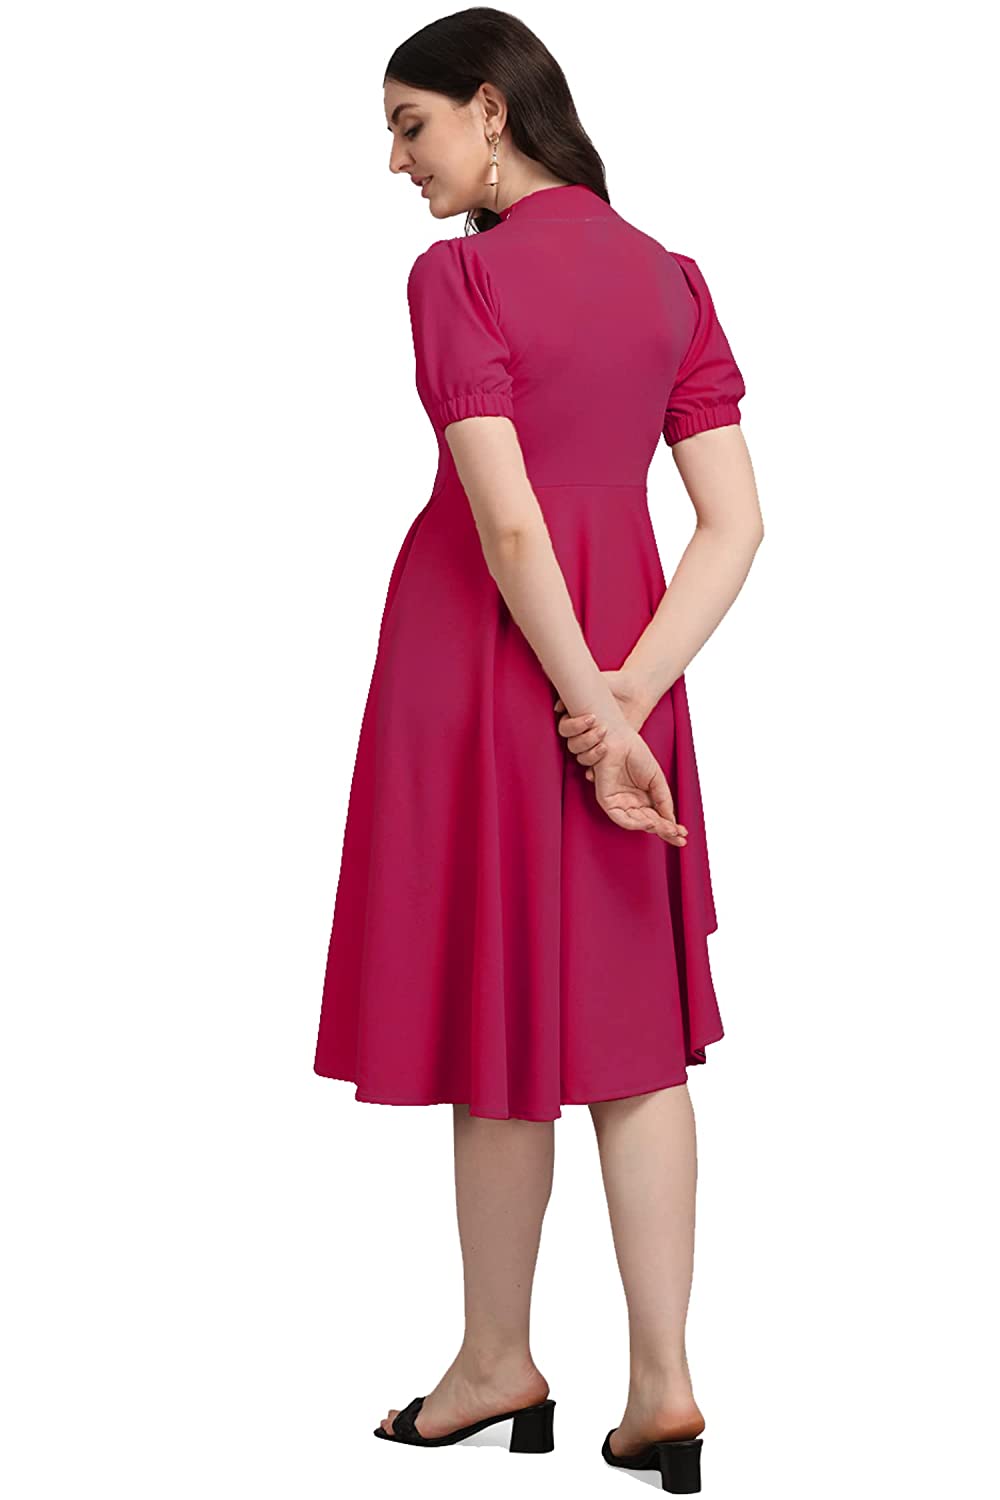 PURVAJA Women’s High-Low Knee Length Dress -  Dresses in Sri Lanka from Arcade Online Shopping - Just Rs. 4699!